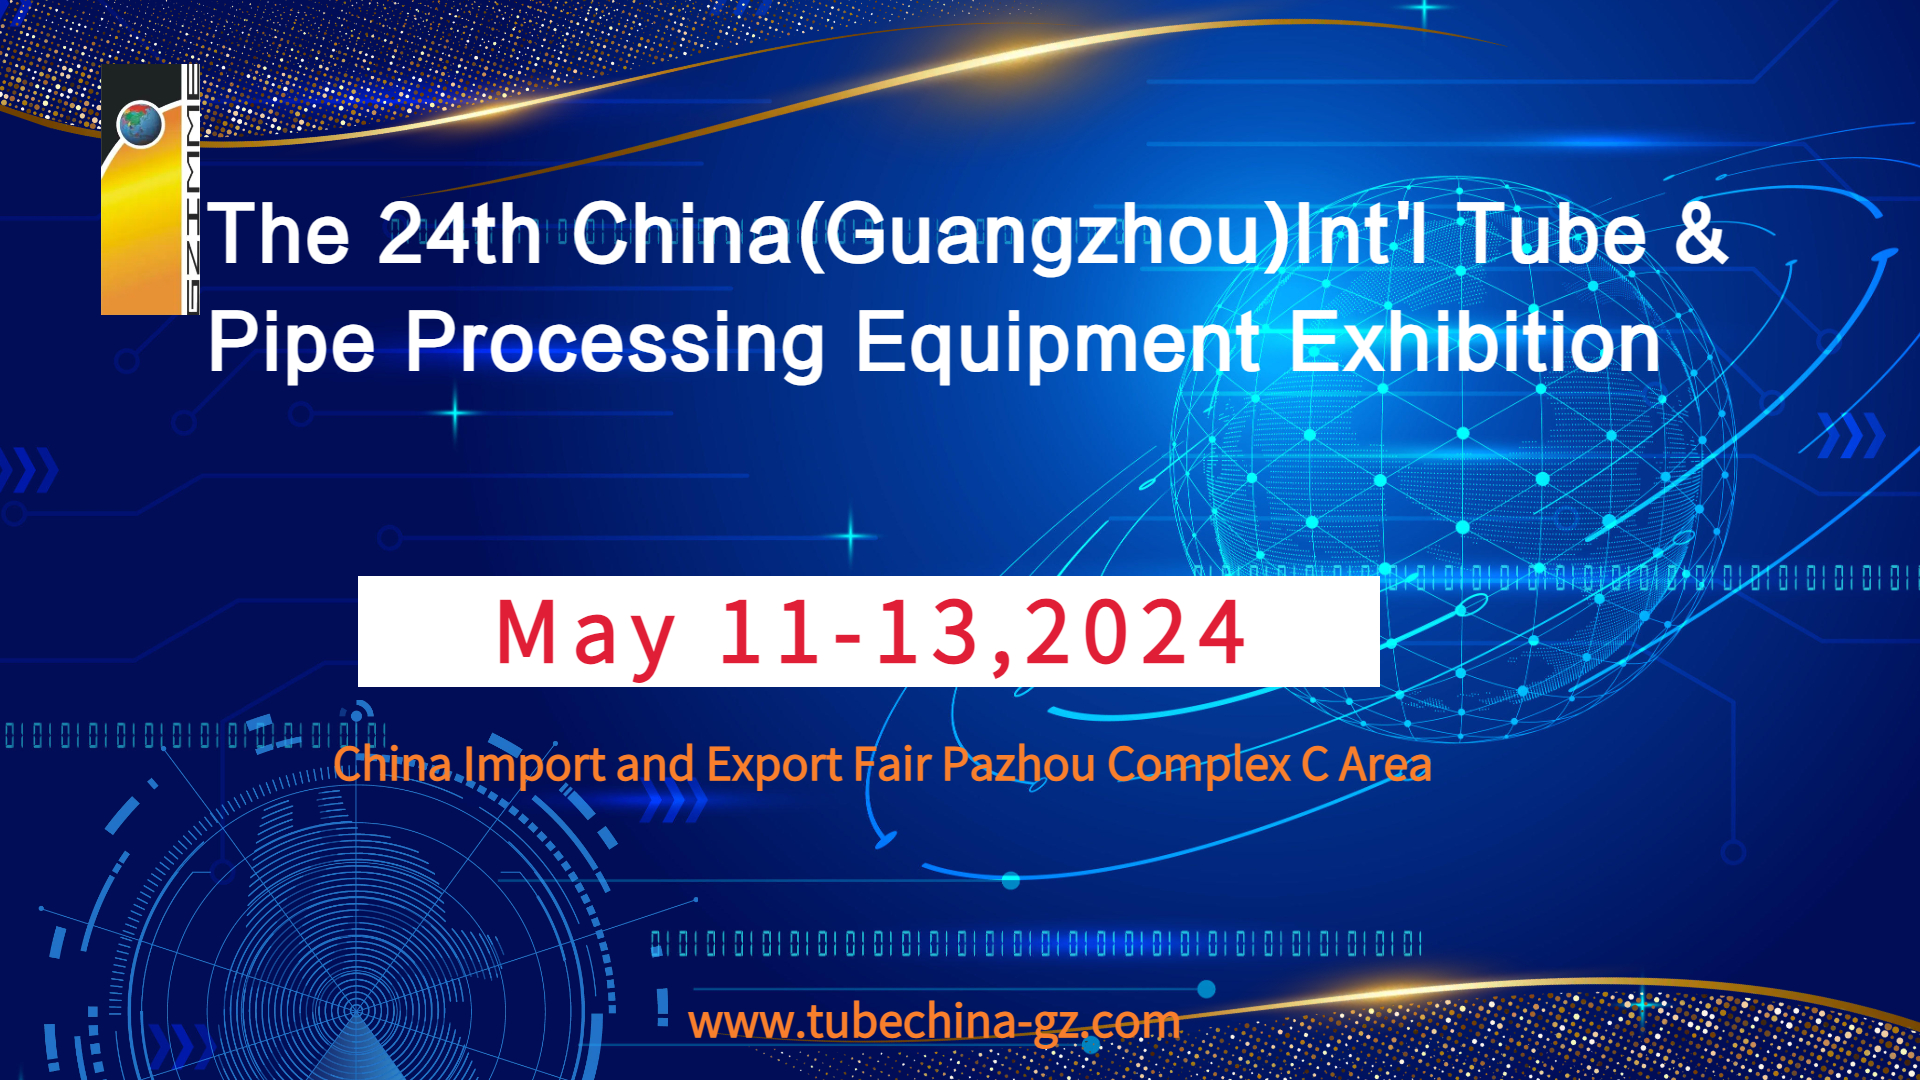 THE 24TH CHINA(GUANGZHOU) INT’L TUBE & PIPE PROCESSING EQUIPMENT EXHIBITION